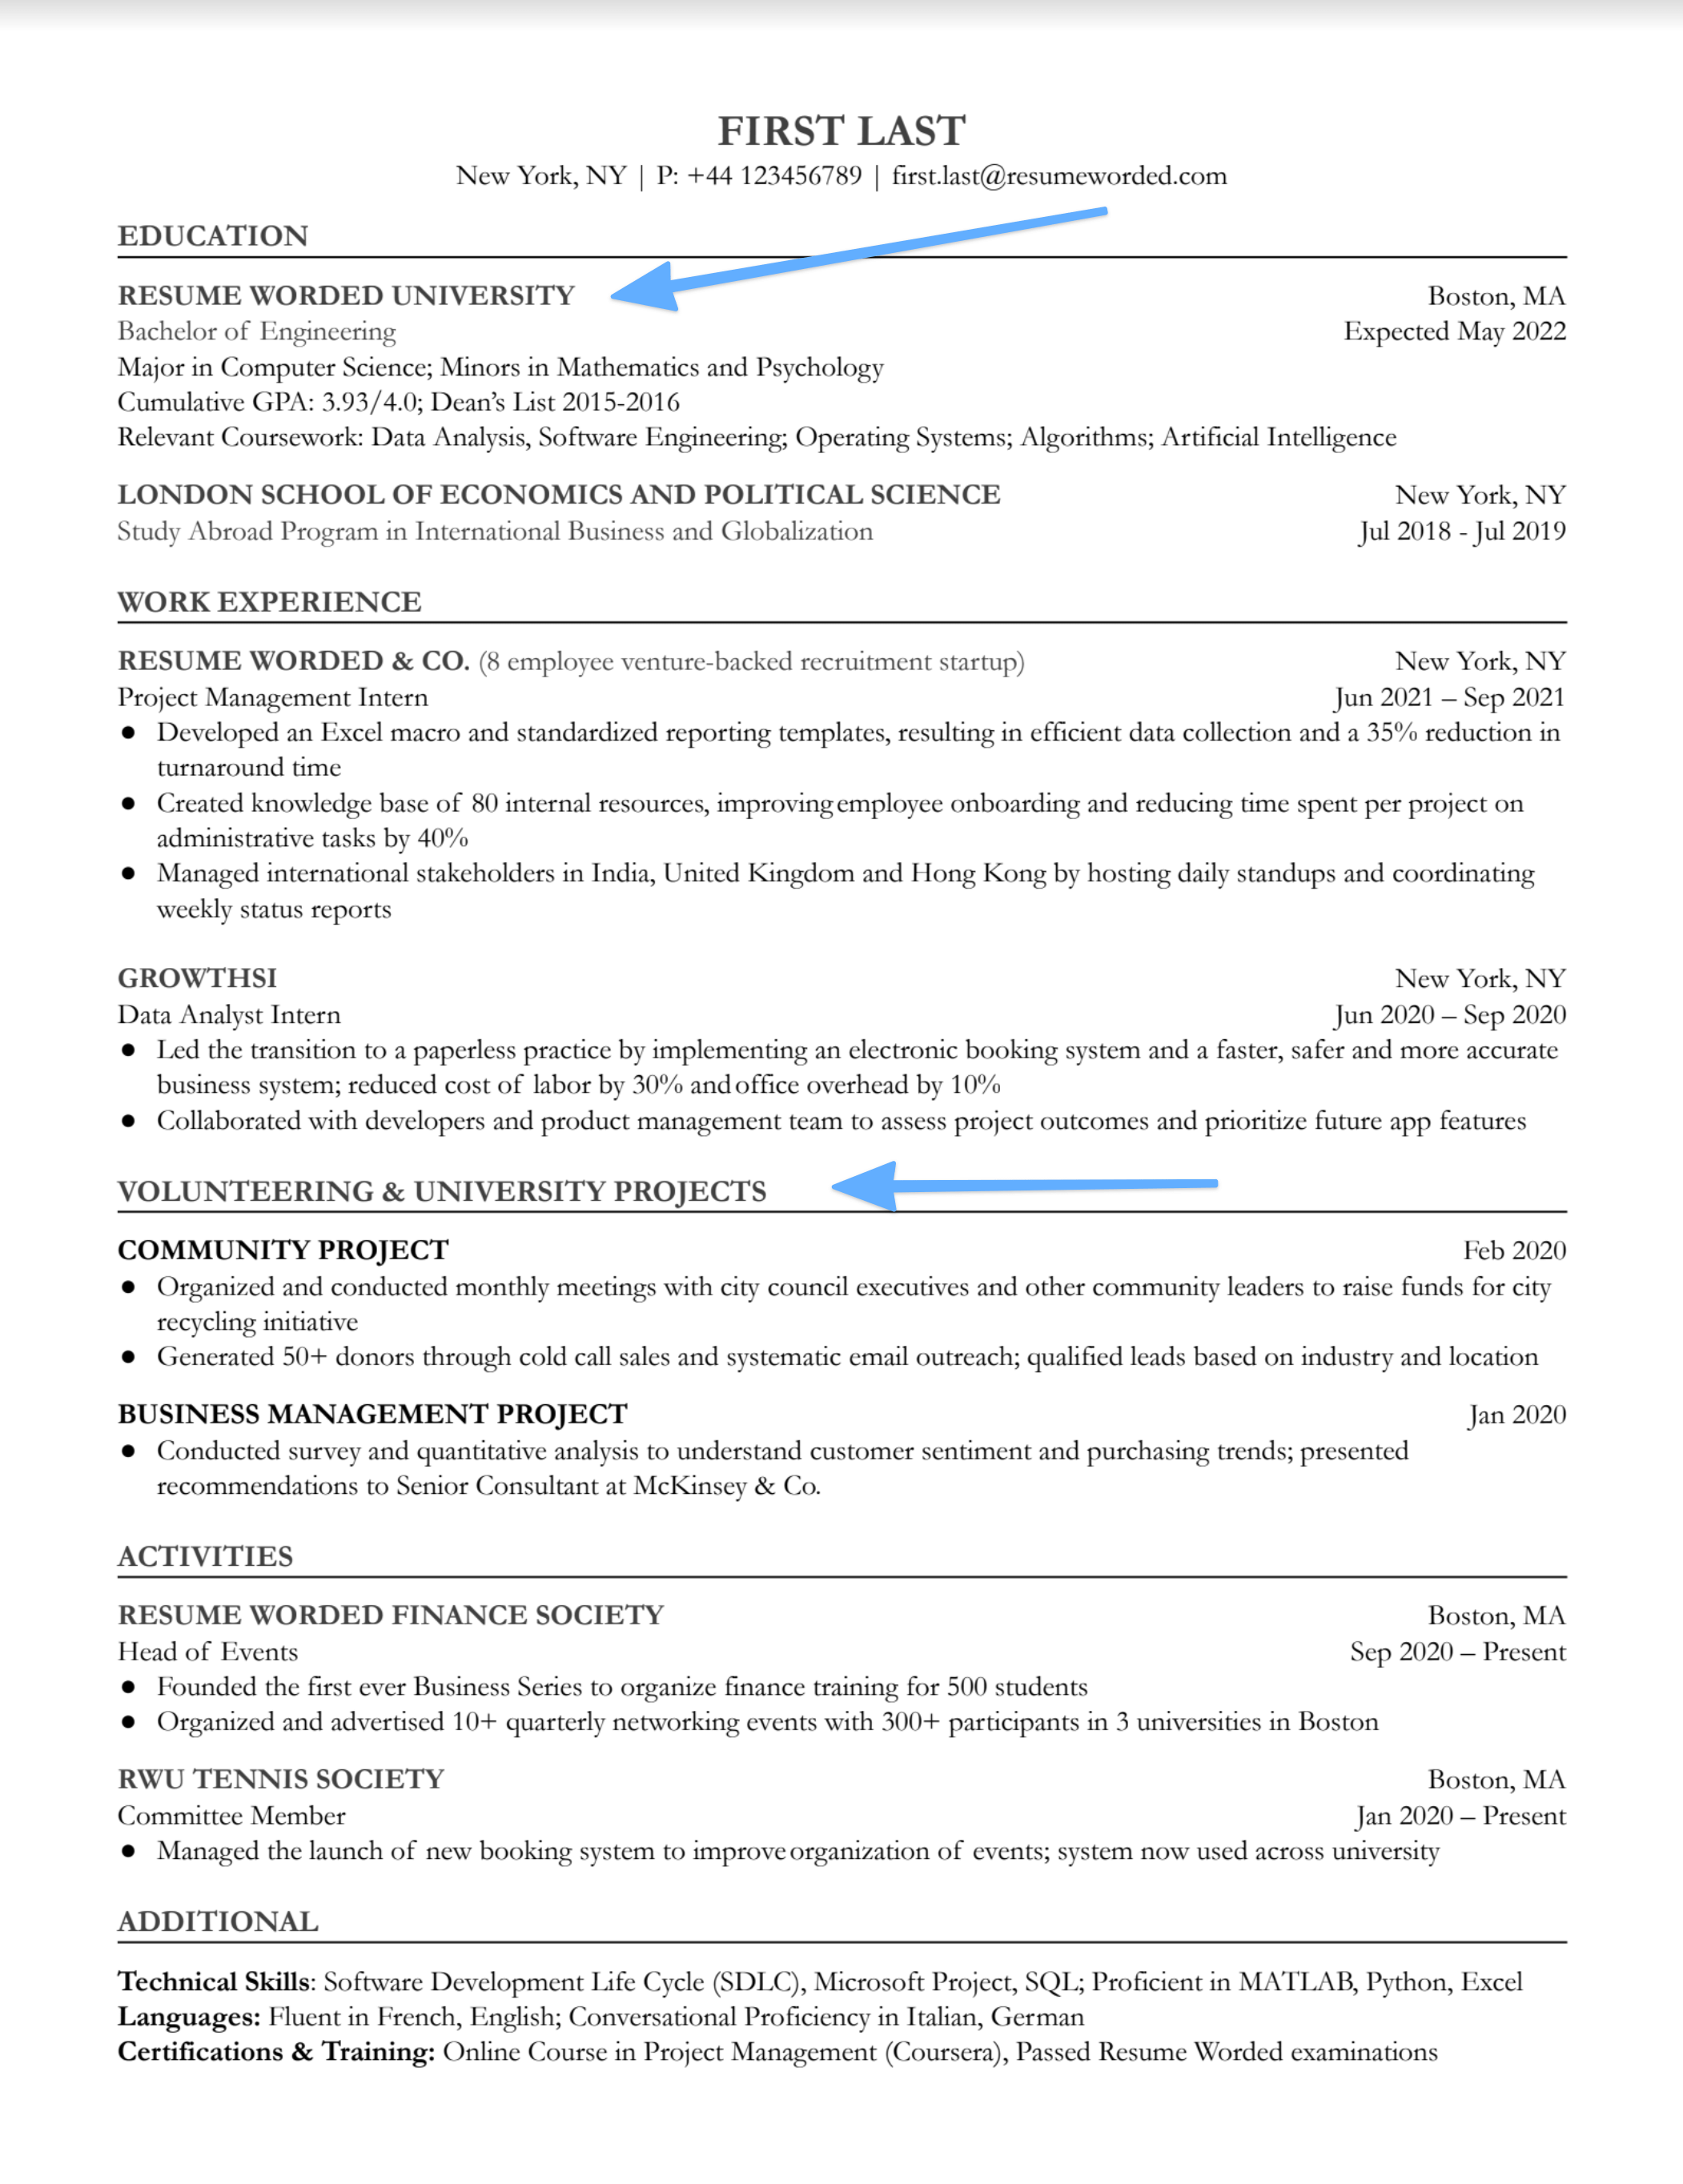 Entry level project manager resume template with education, volunteer work, and activities